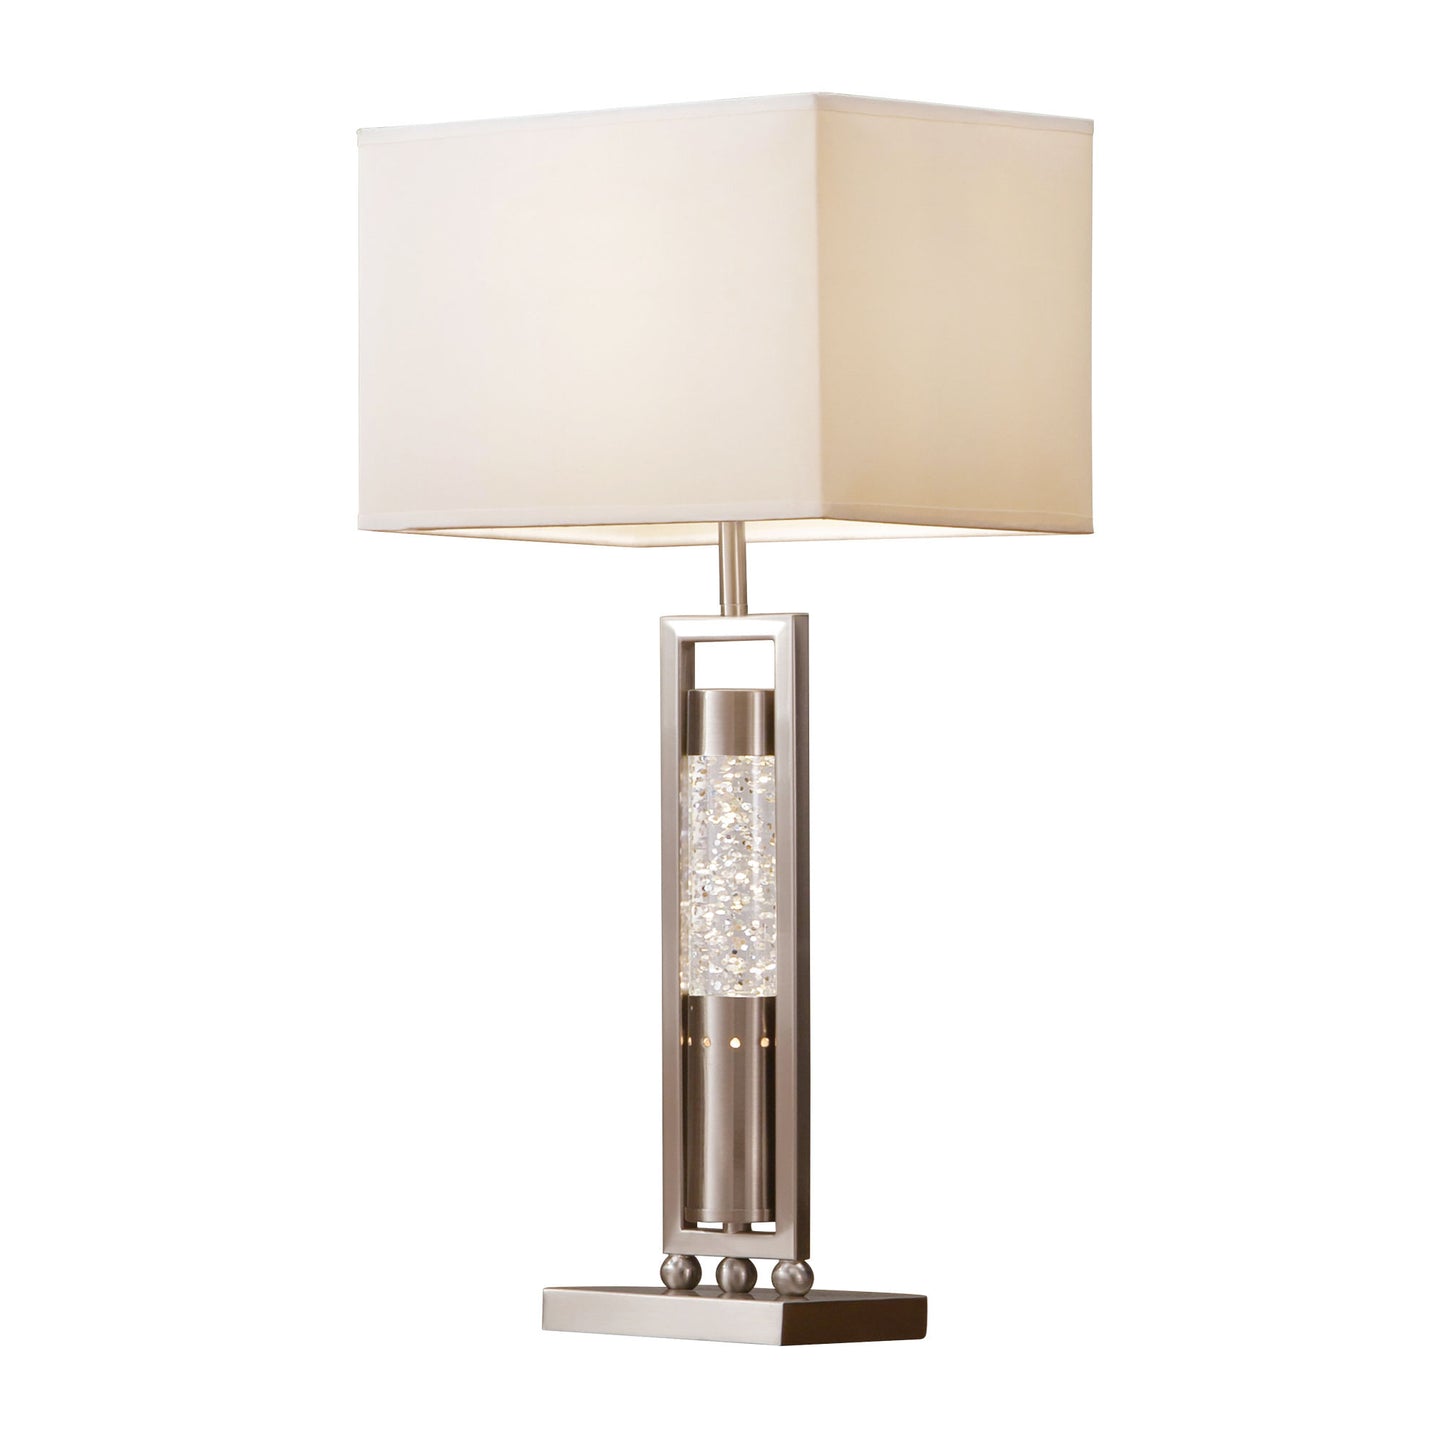 modern design table lamp with satin nickel finish sparkle